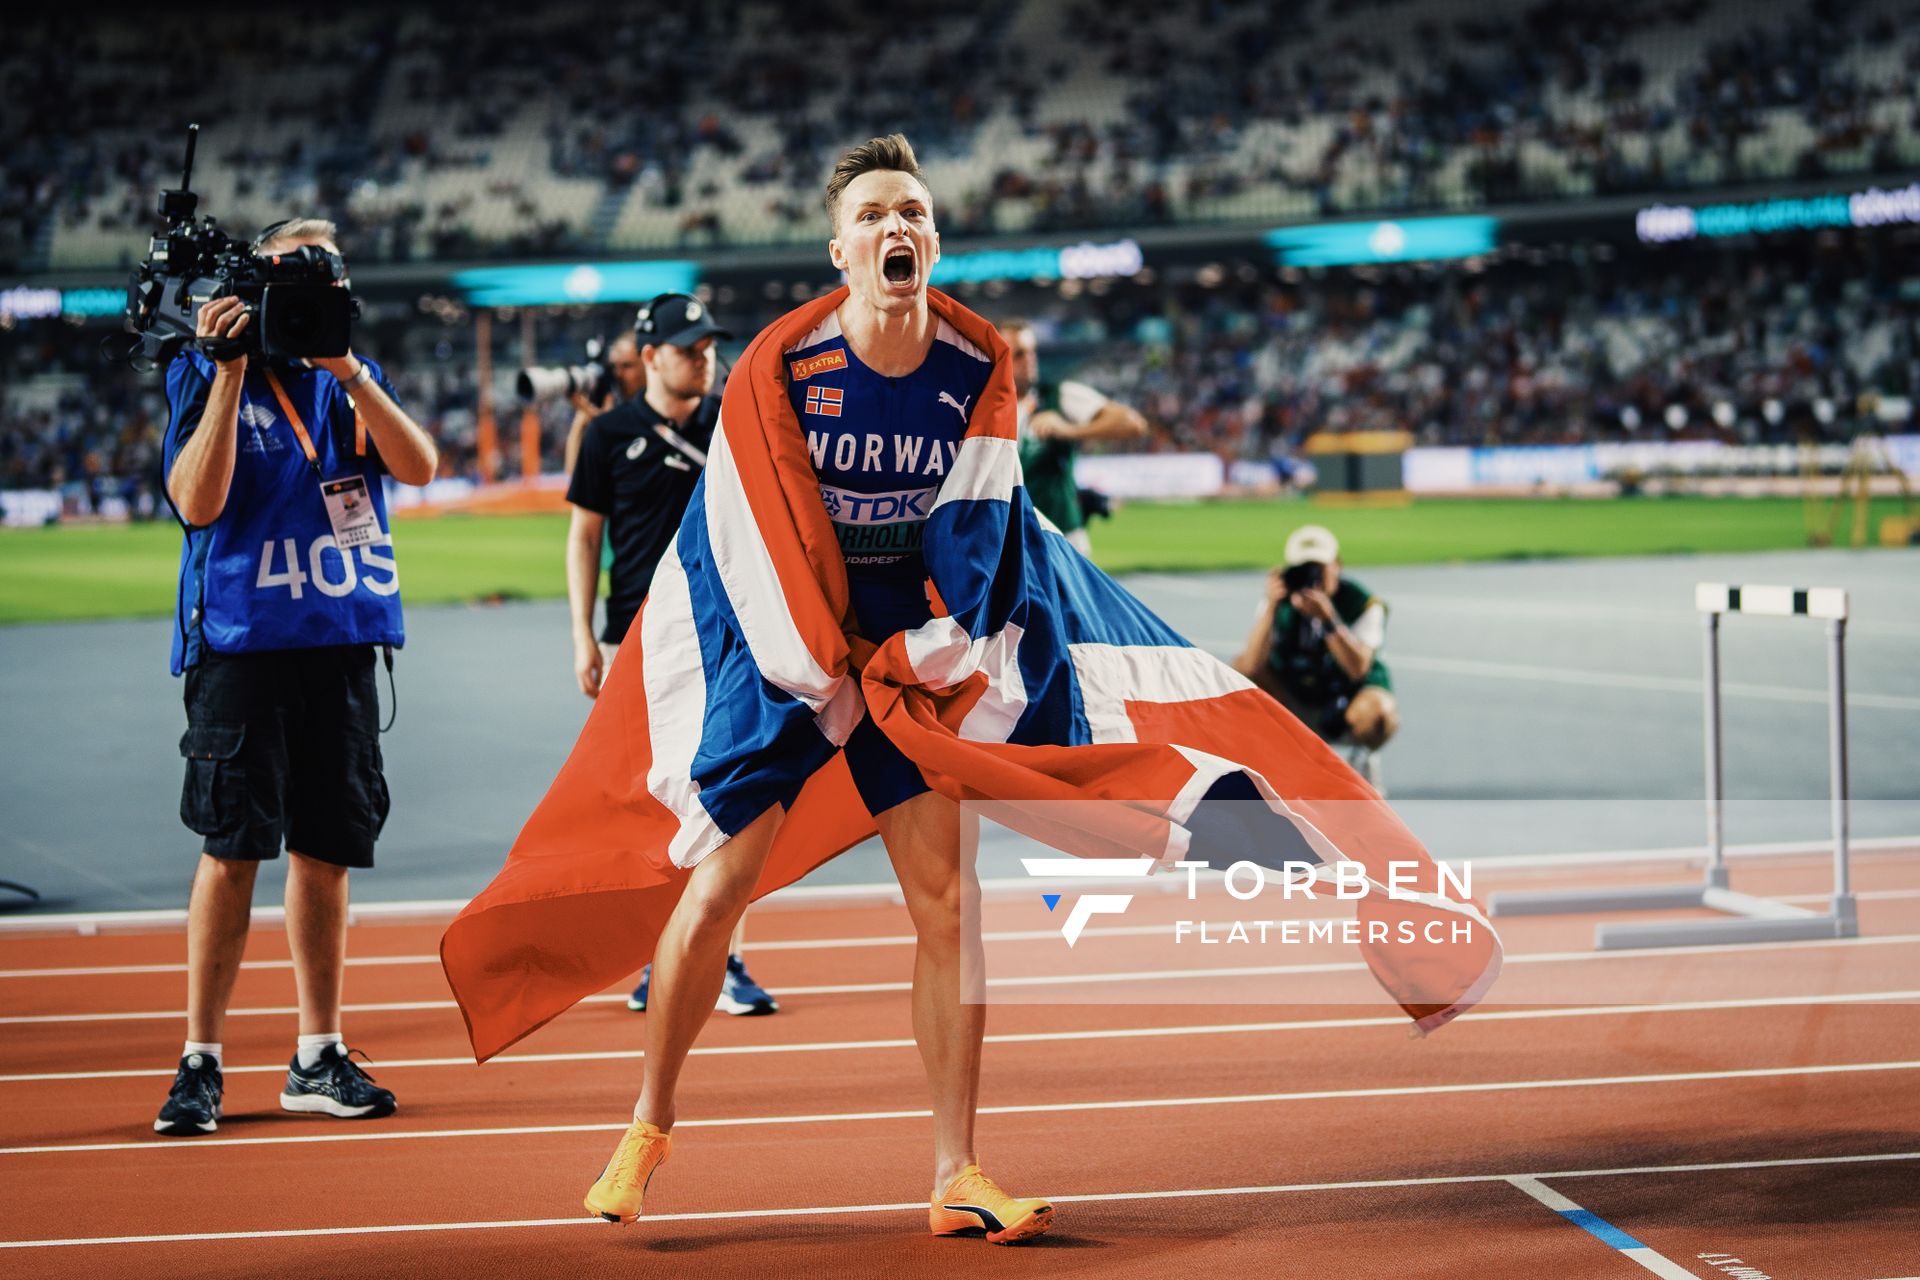 Karsten Warholm (NOR/Norway) during the 400 Metres Hurdles Final on Day 5 of the World Athletics Championships Budapest 23 at the National Athletics Centre in Budapest, Hungary on August 23, 2023.